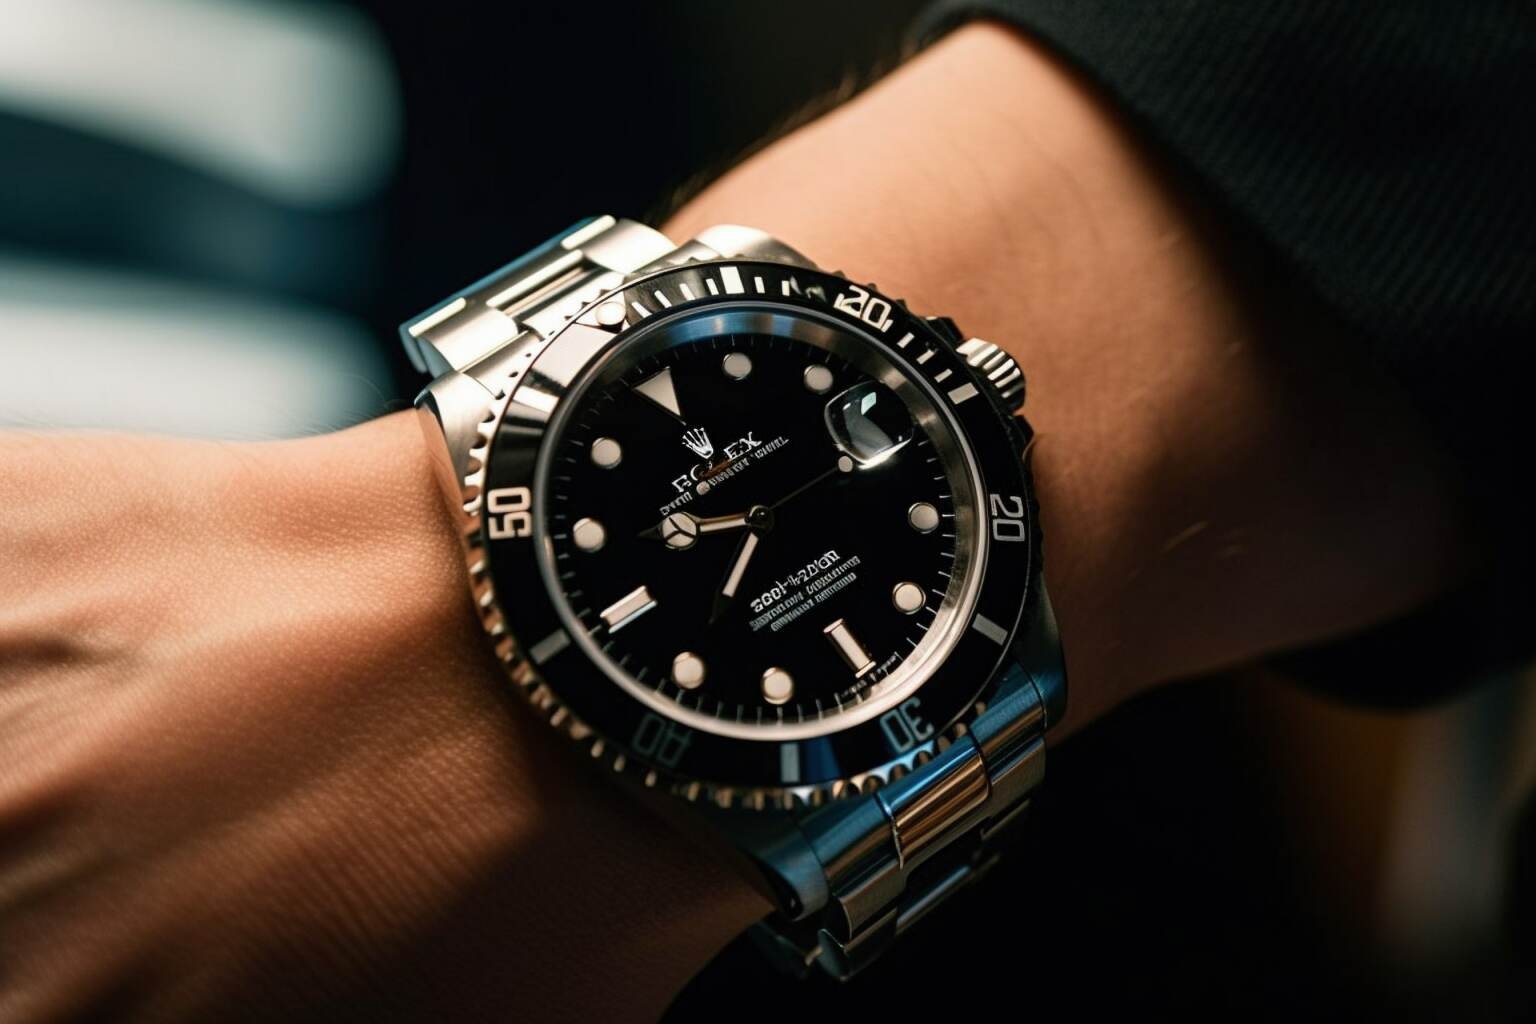 Rolex Watches Have Maintained Their Status Over The Years